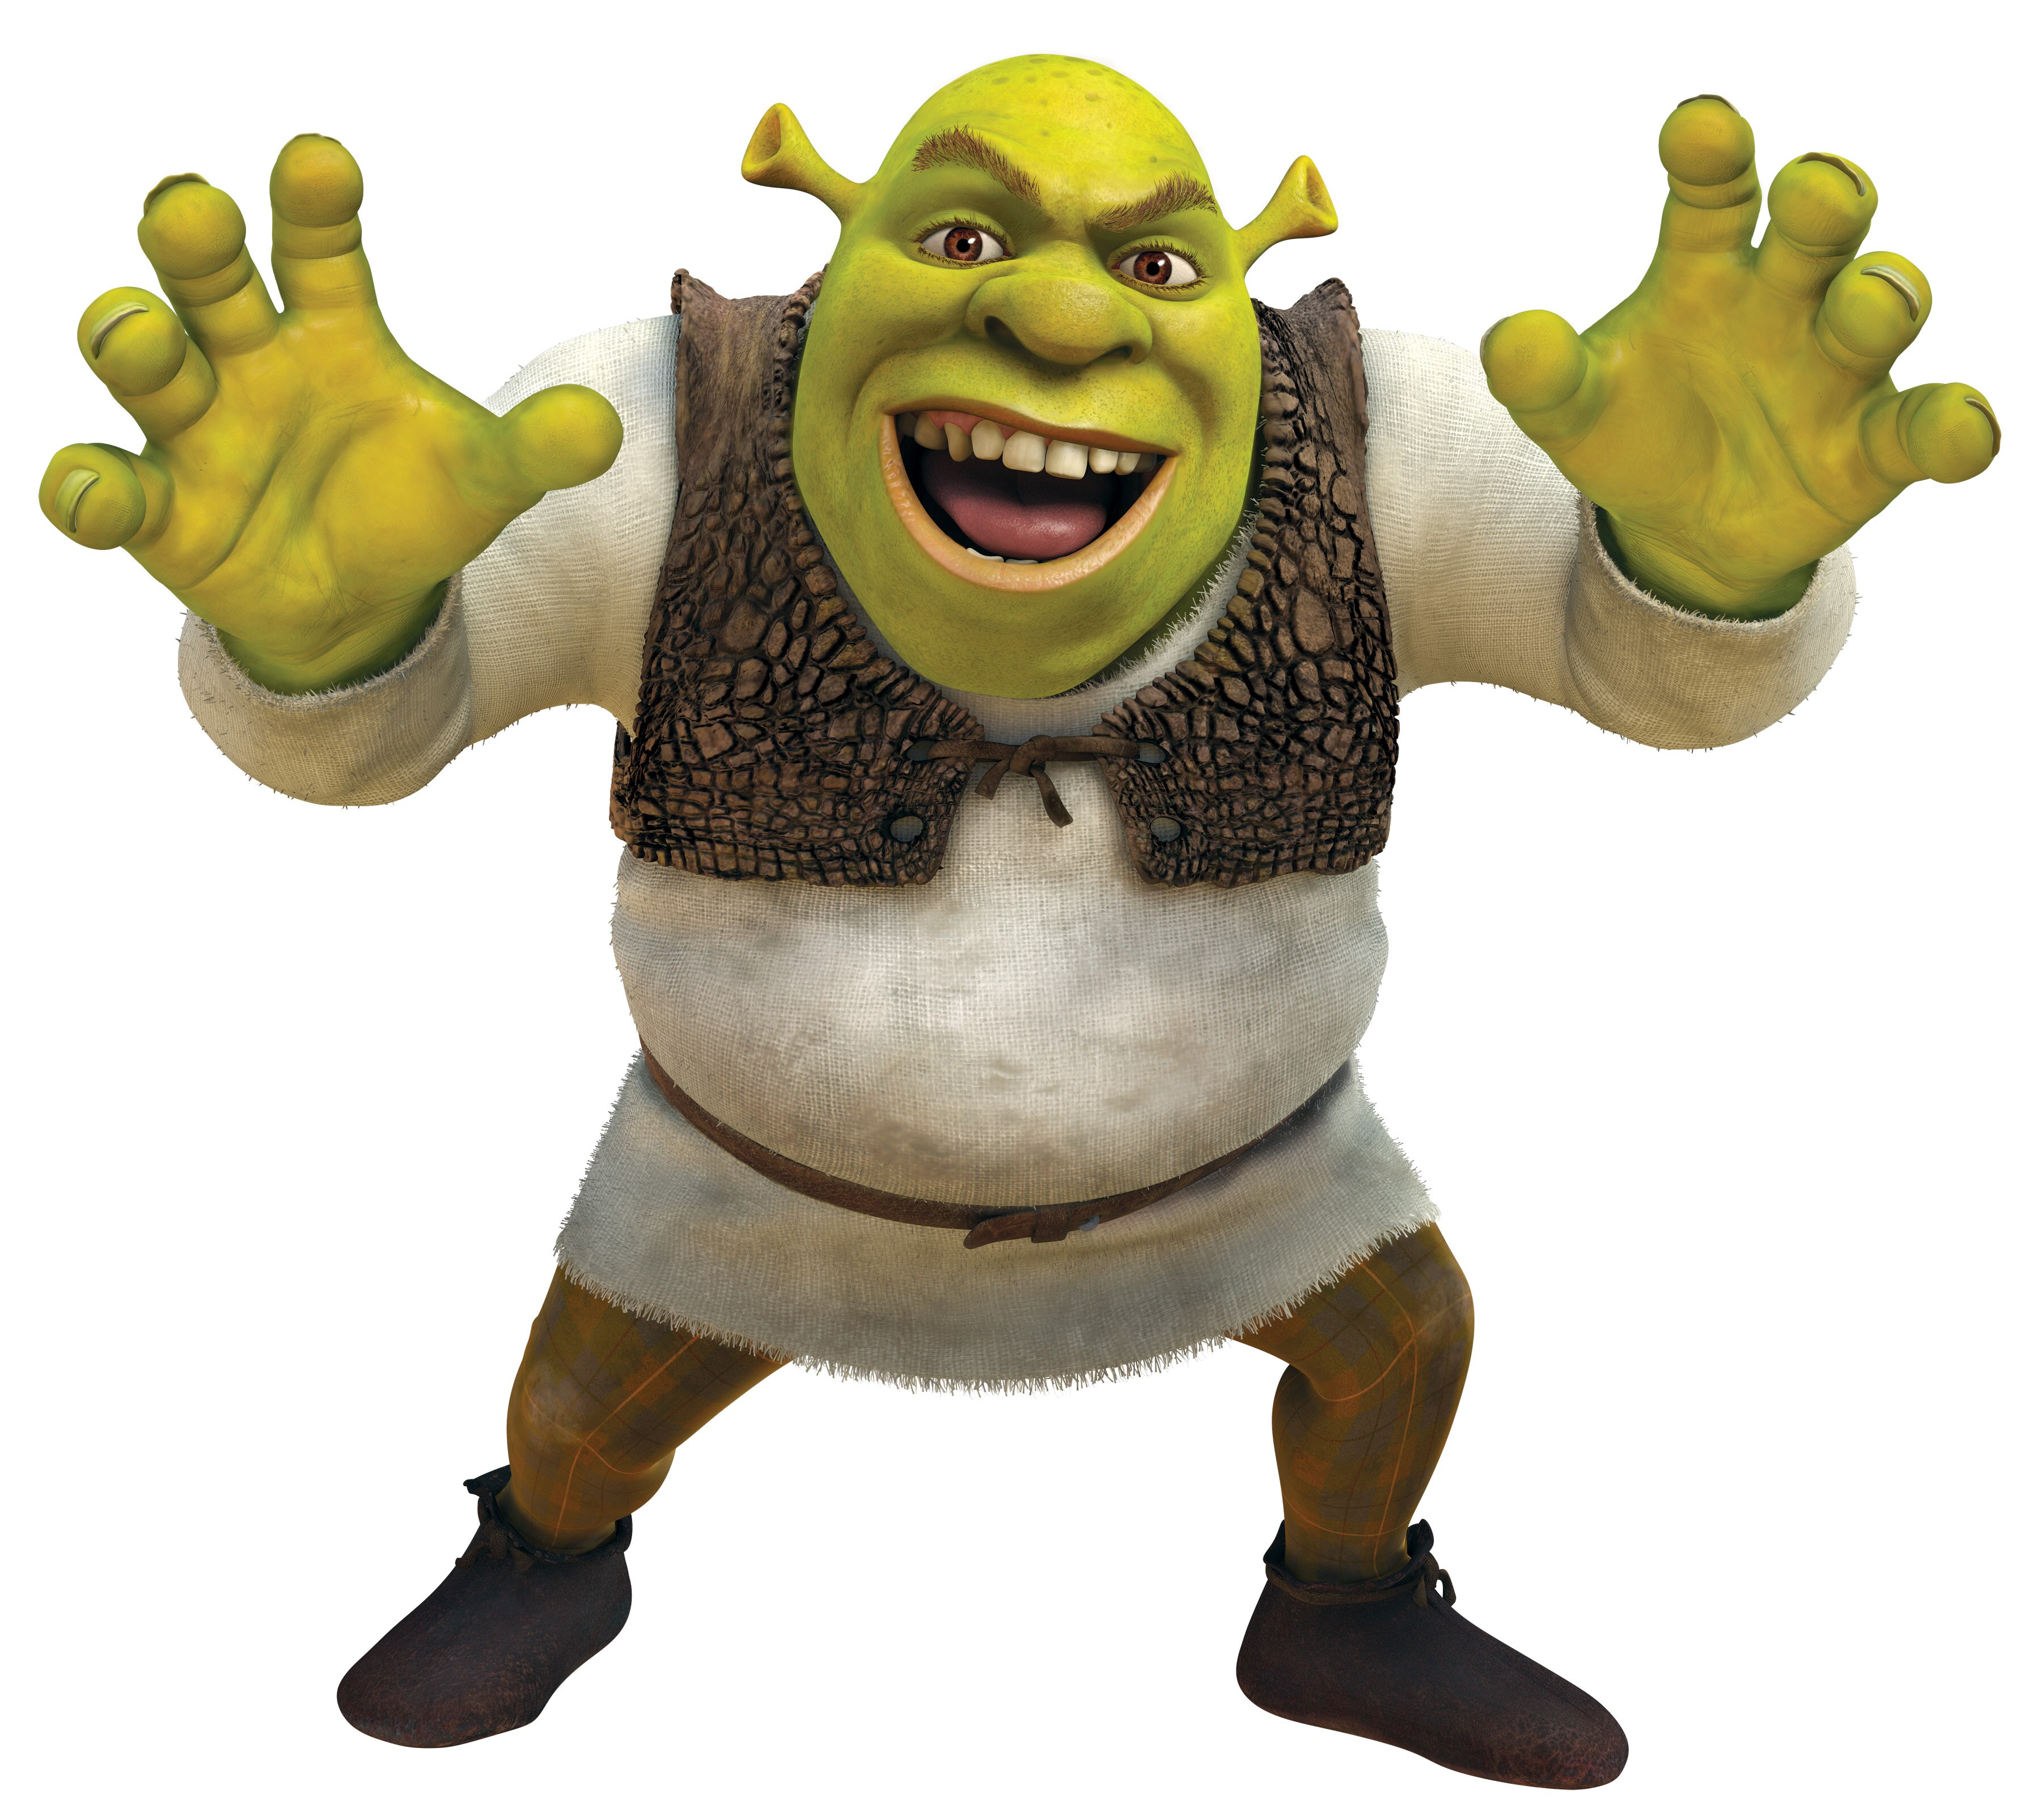 The Shrek logo uses first type, then colour, then image, then texture, to  make itself unique. Its most recog…